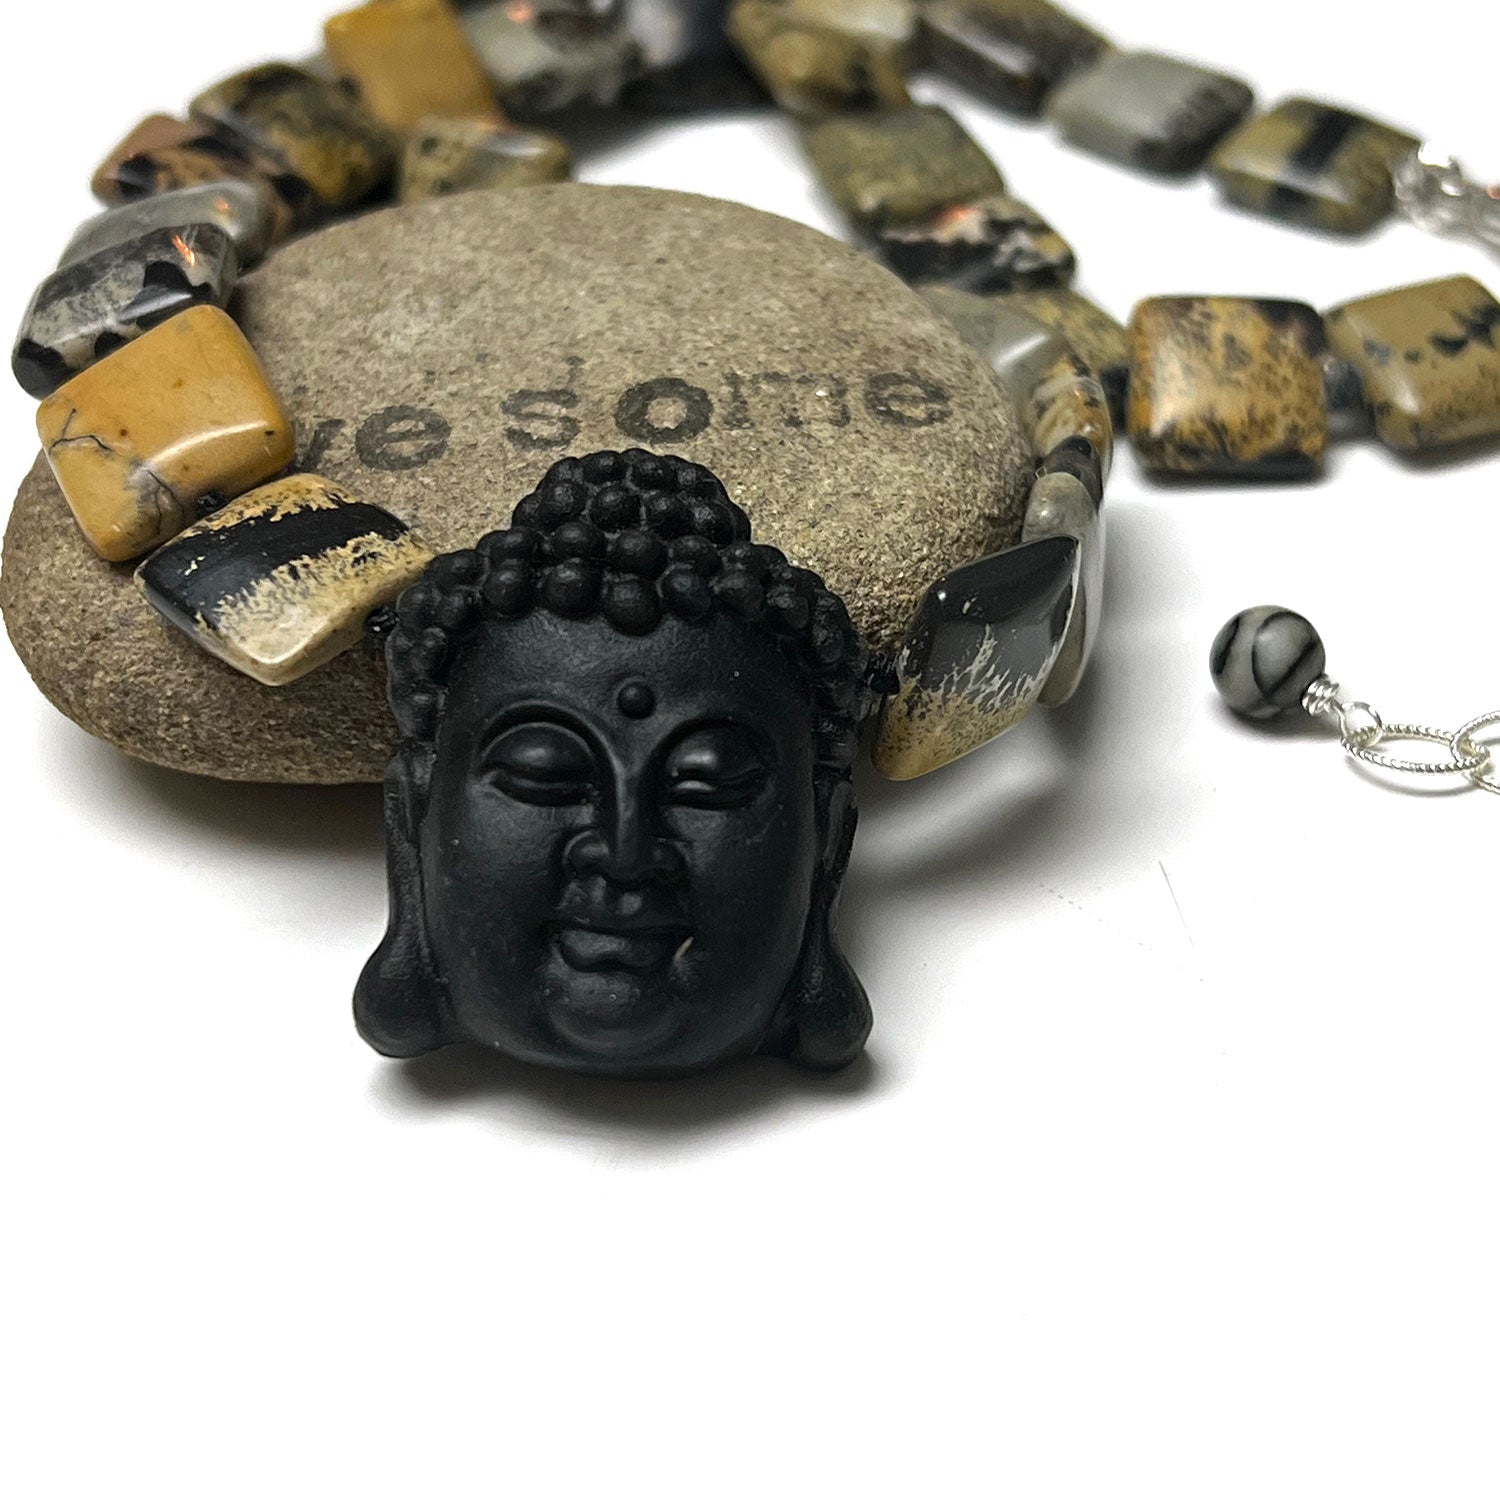 STERLING SILVER OBSIDIAN CARVED BUDDHA NECKLACE - LIGHT INTO DARKNESS TALISMAN